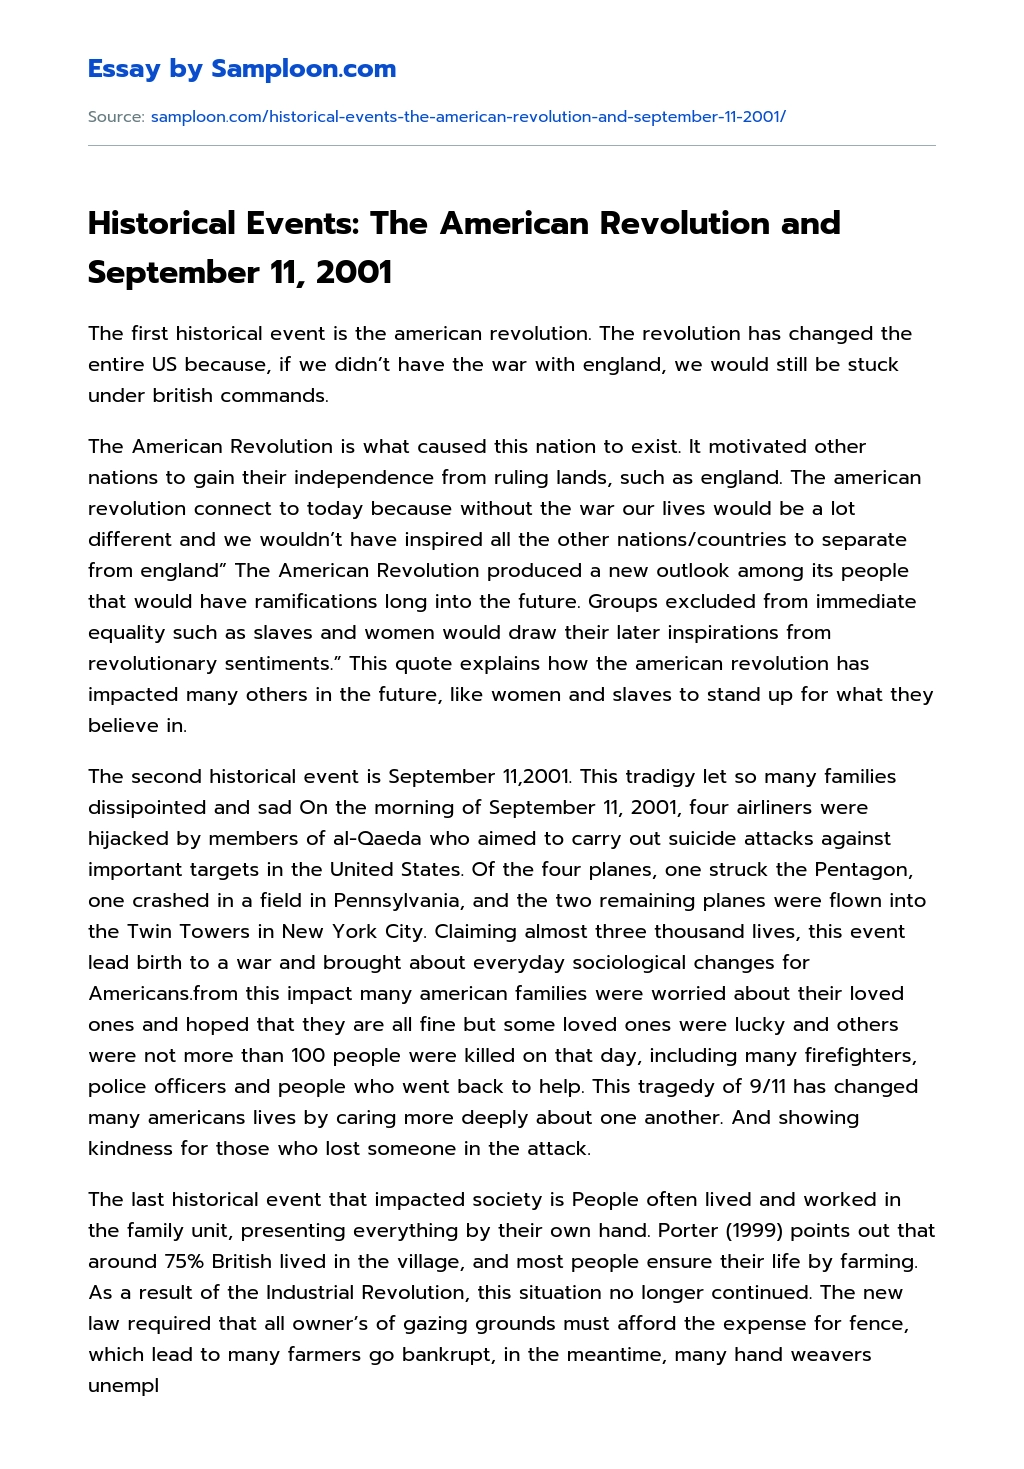 Historical Events: The American Revolution and September 11, 2001 essay